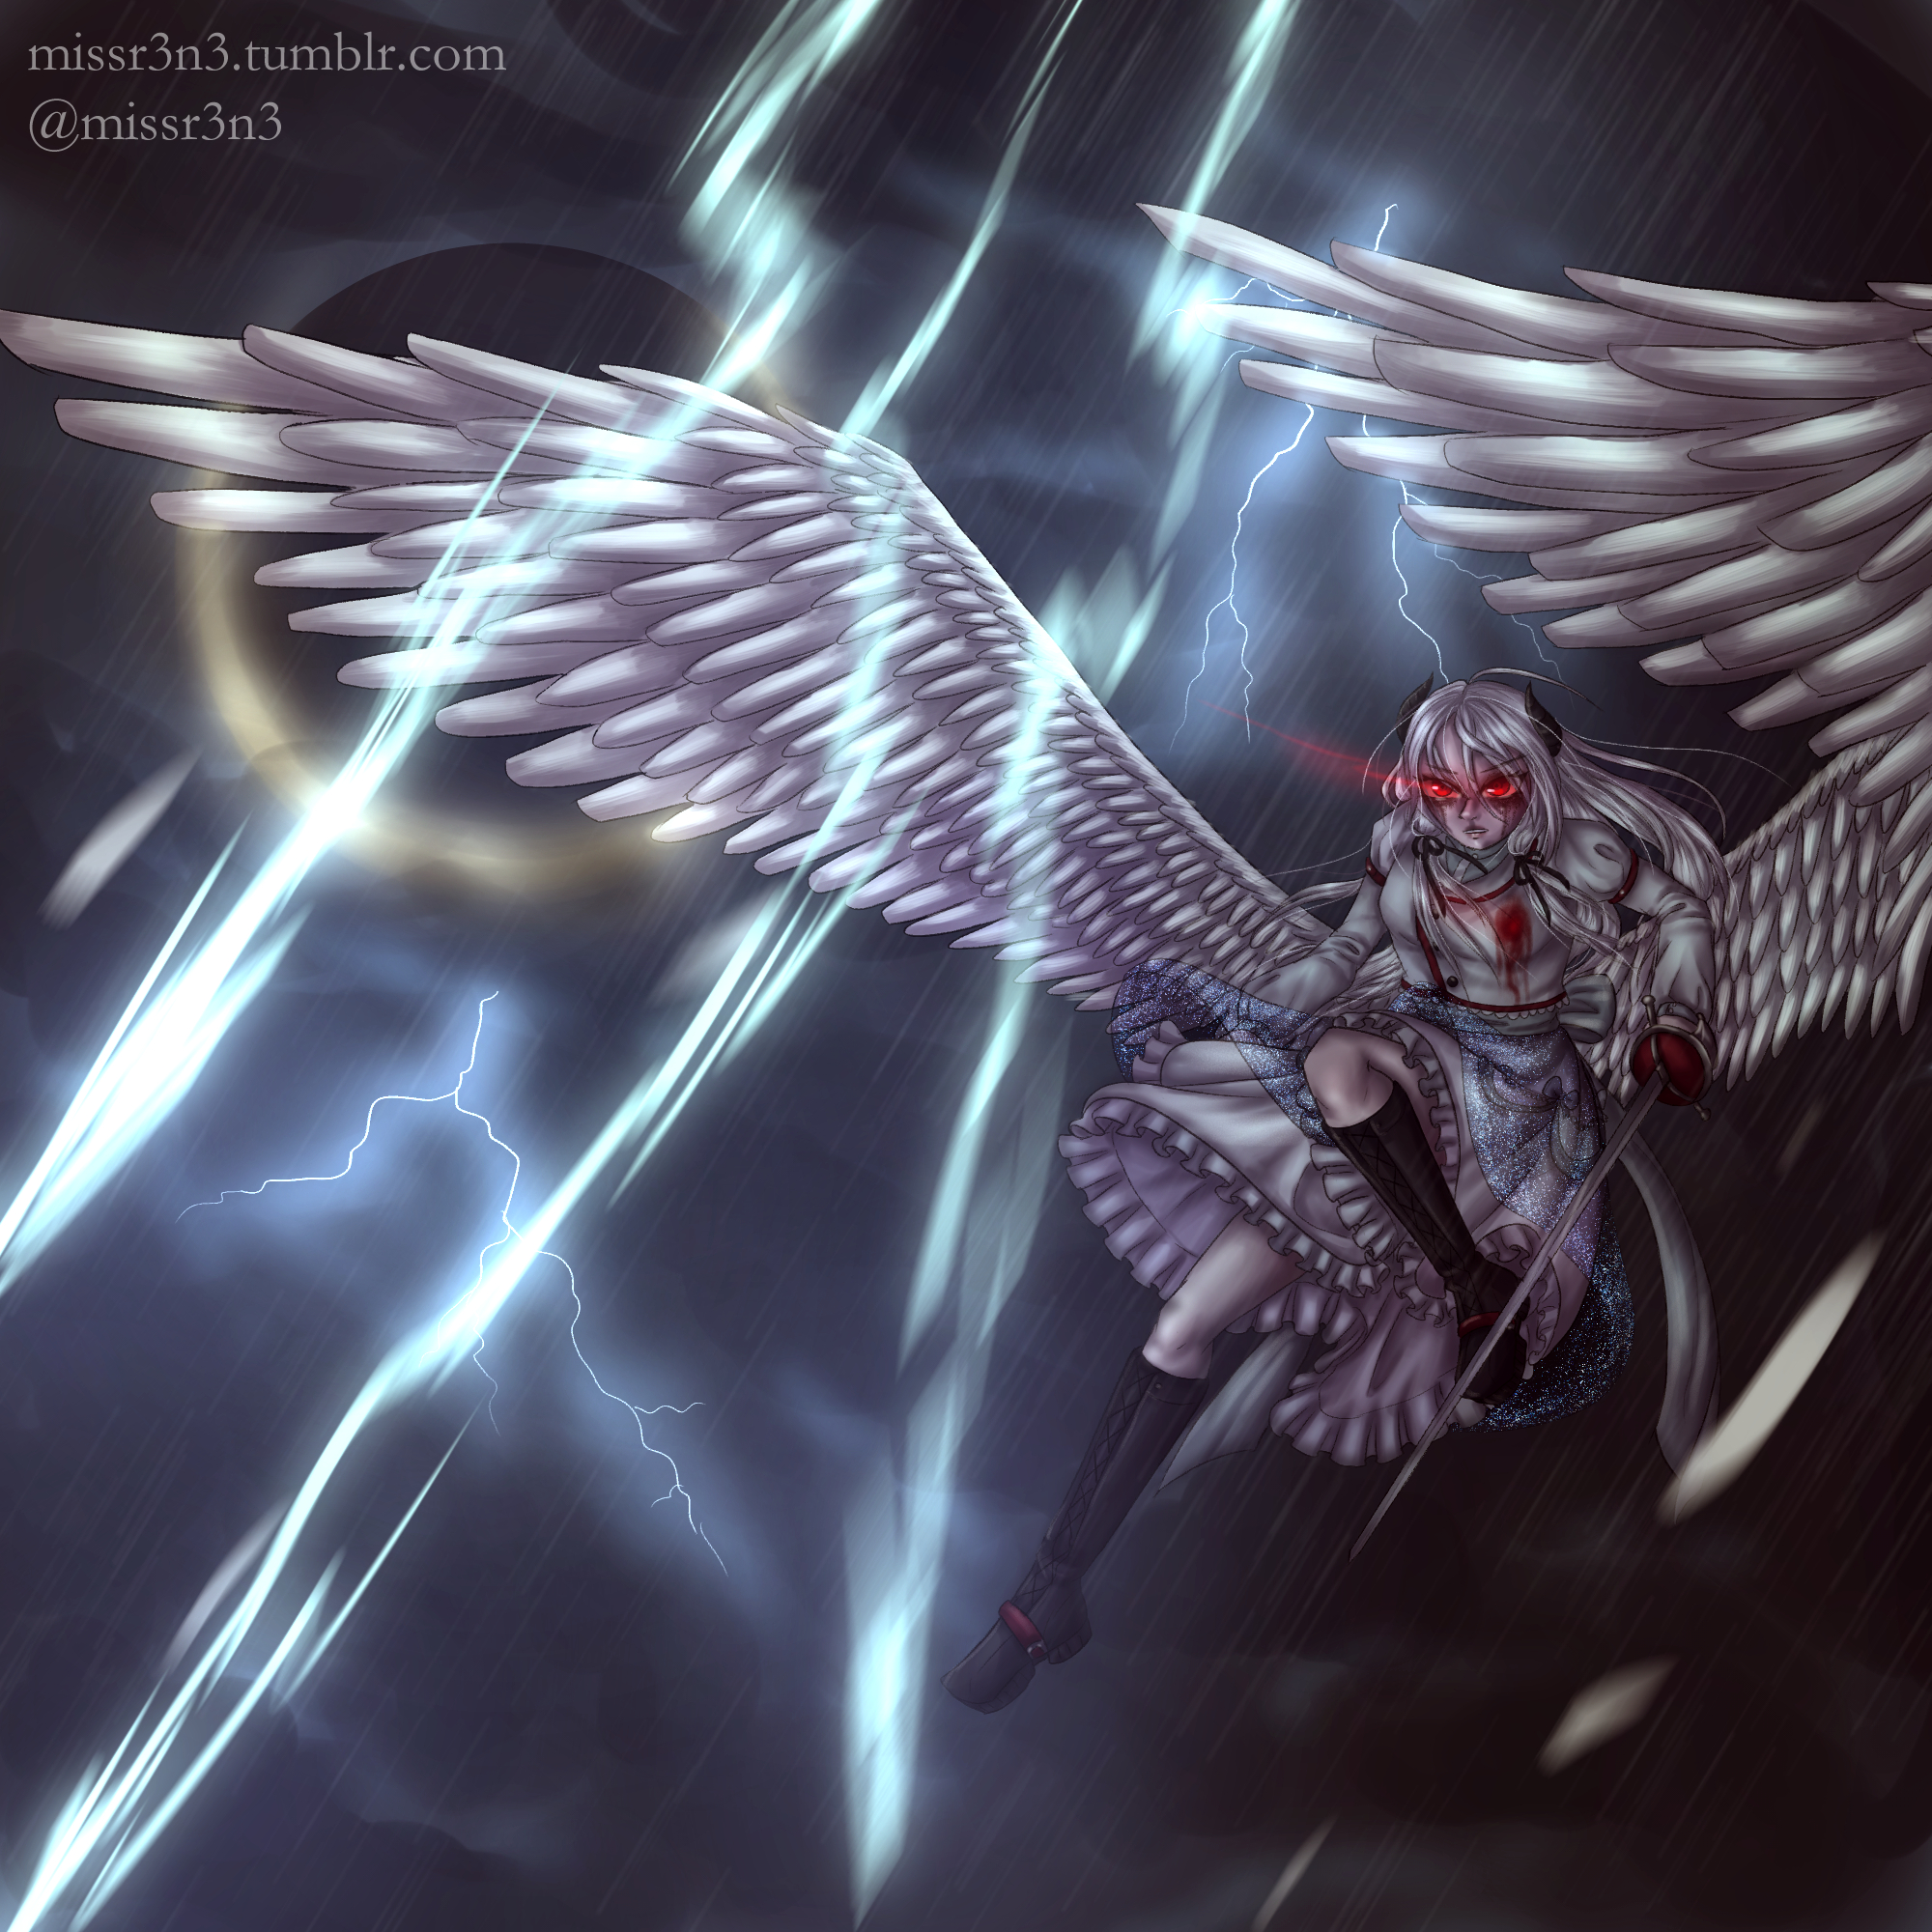 an anime girl with white hair, wings, and glowing red eyes dodges bolts of lightning in a thunderstorm